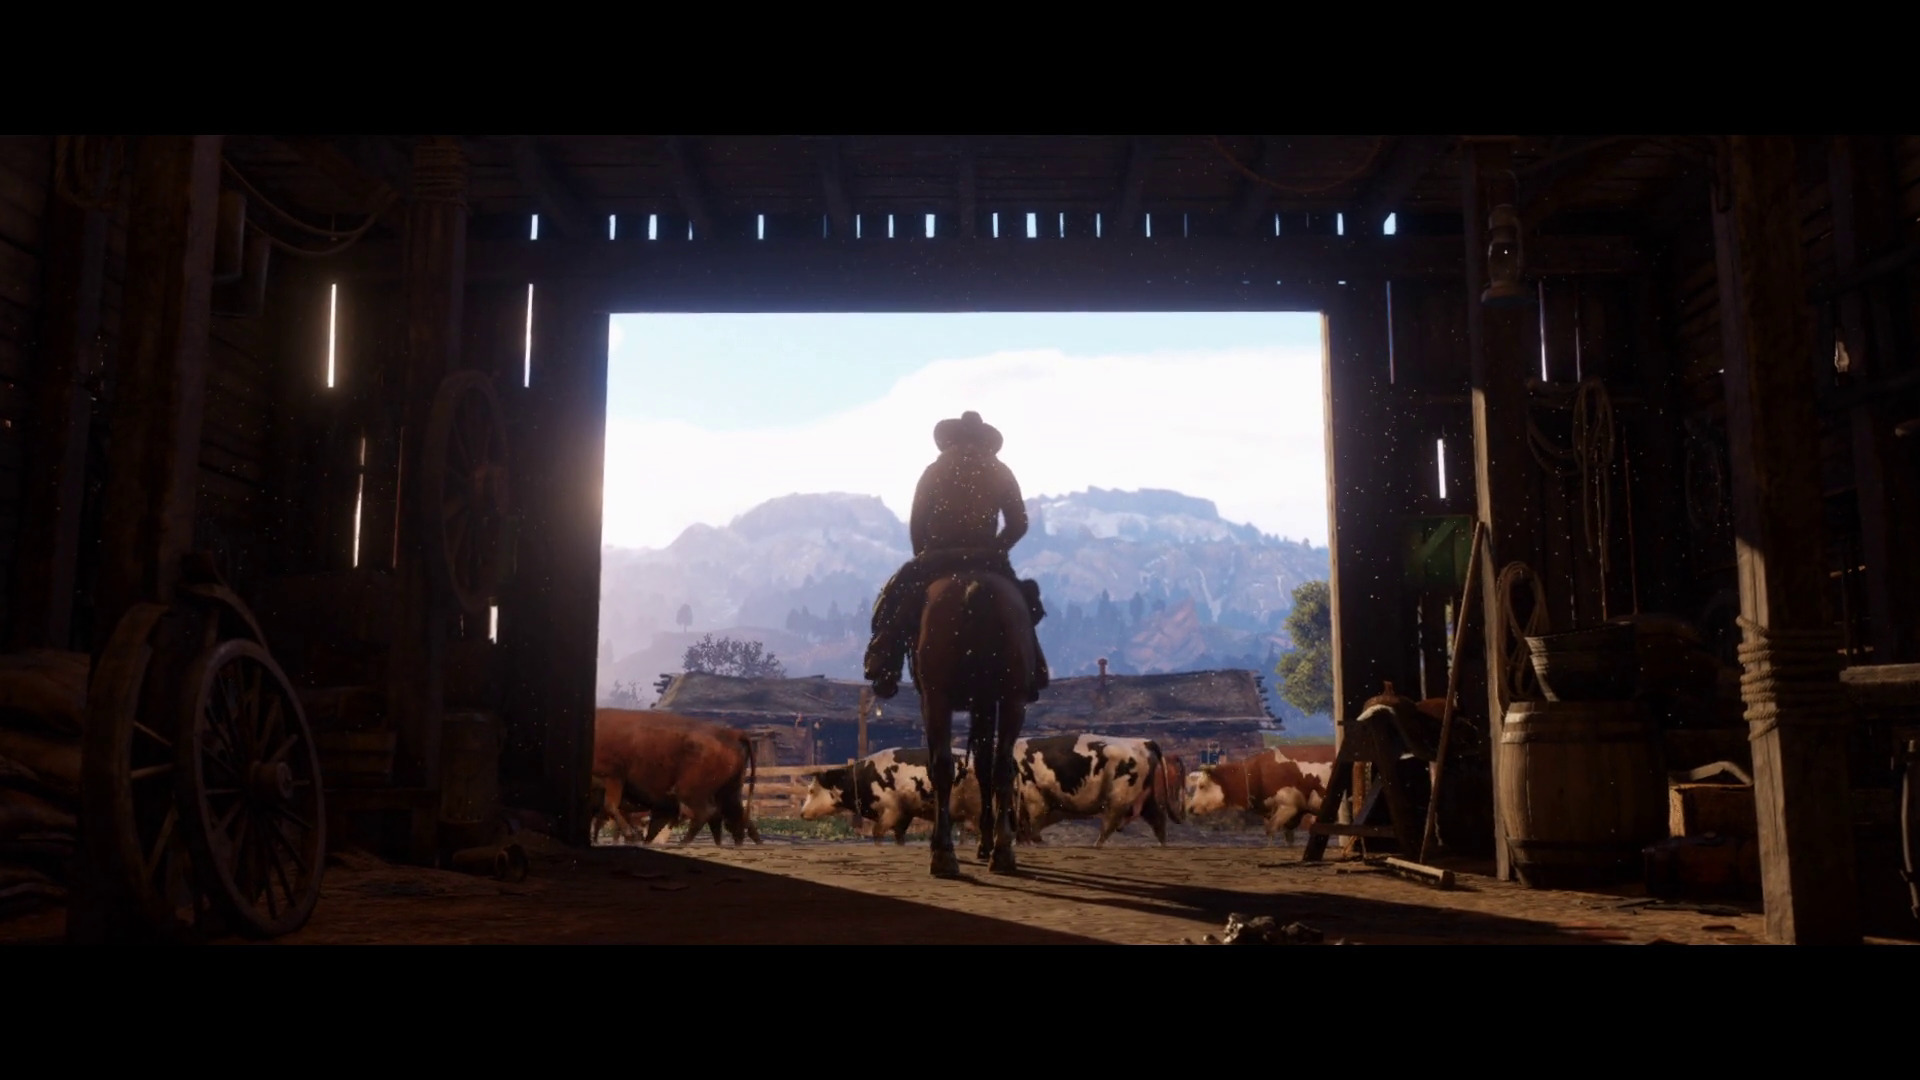 http://www.rdrvision.com/images/content/red-dead-redemption-2/trailer_1/red-dead-redemption-2_trailer-1_15.png